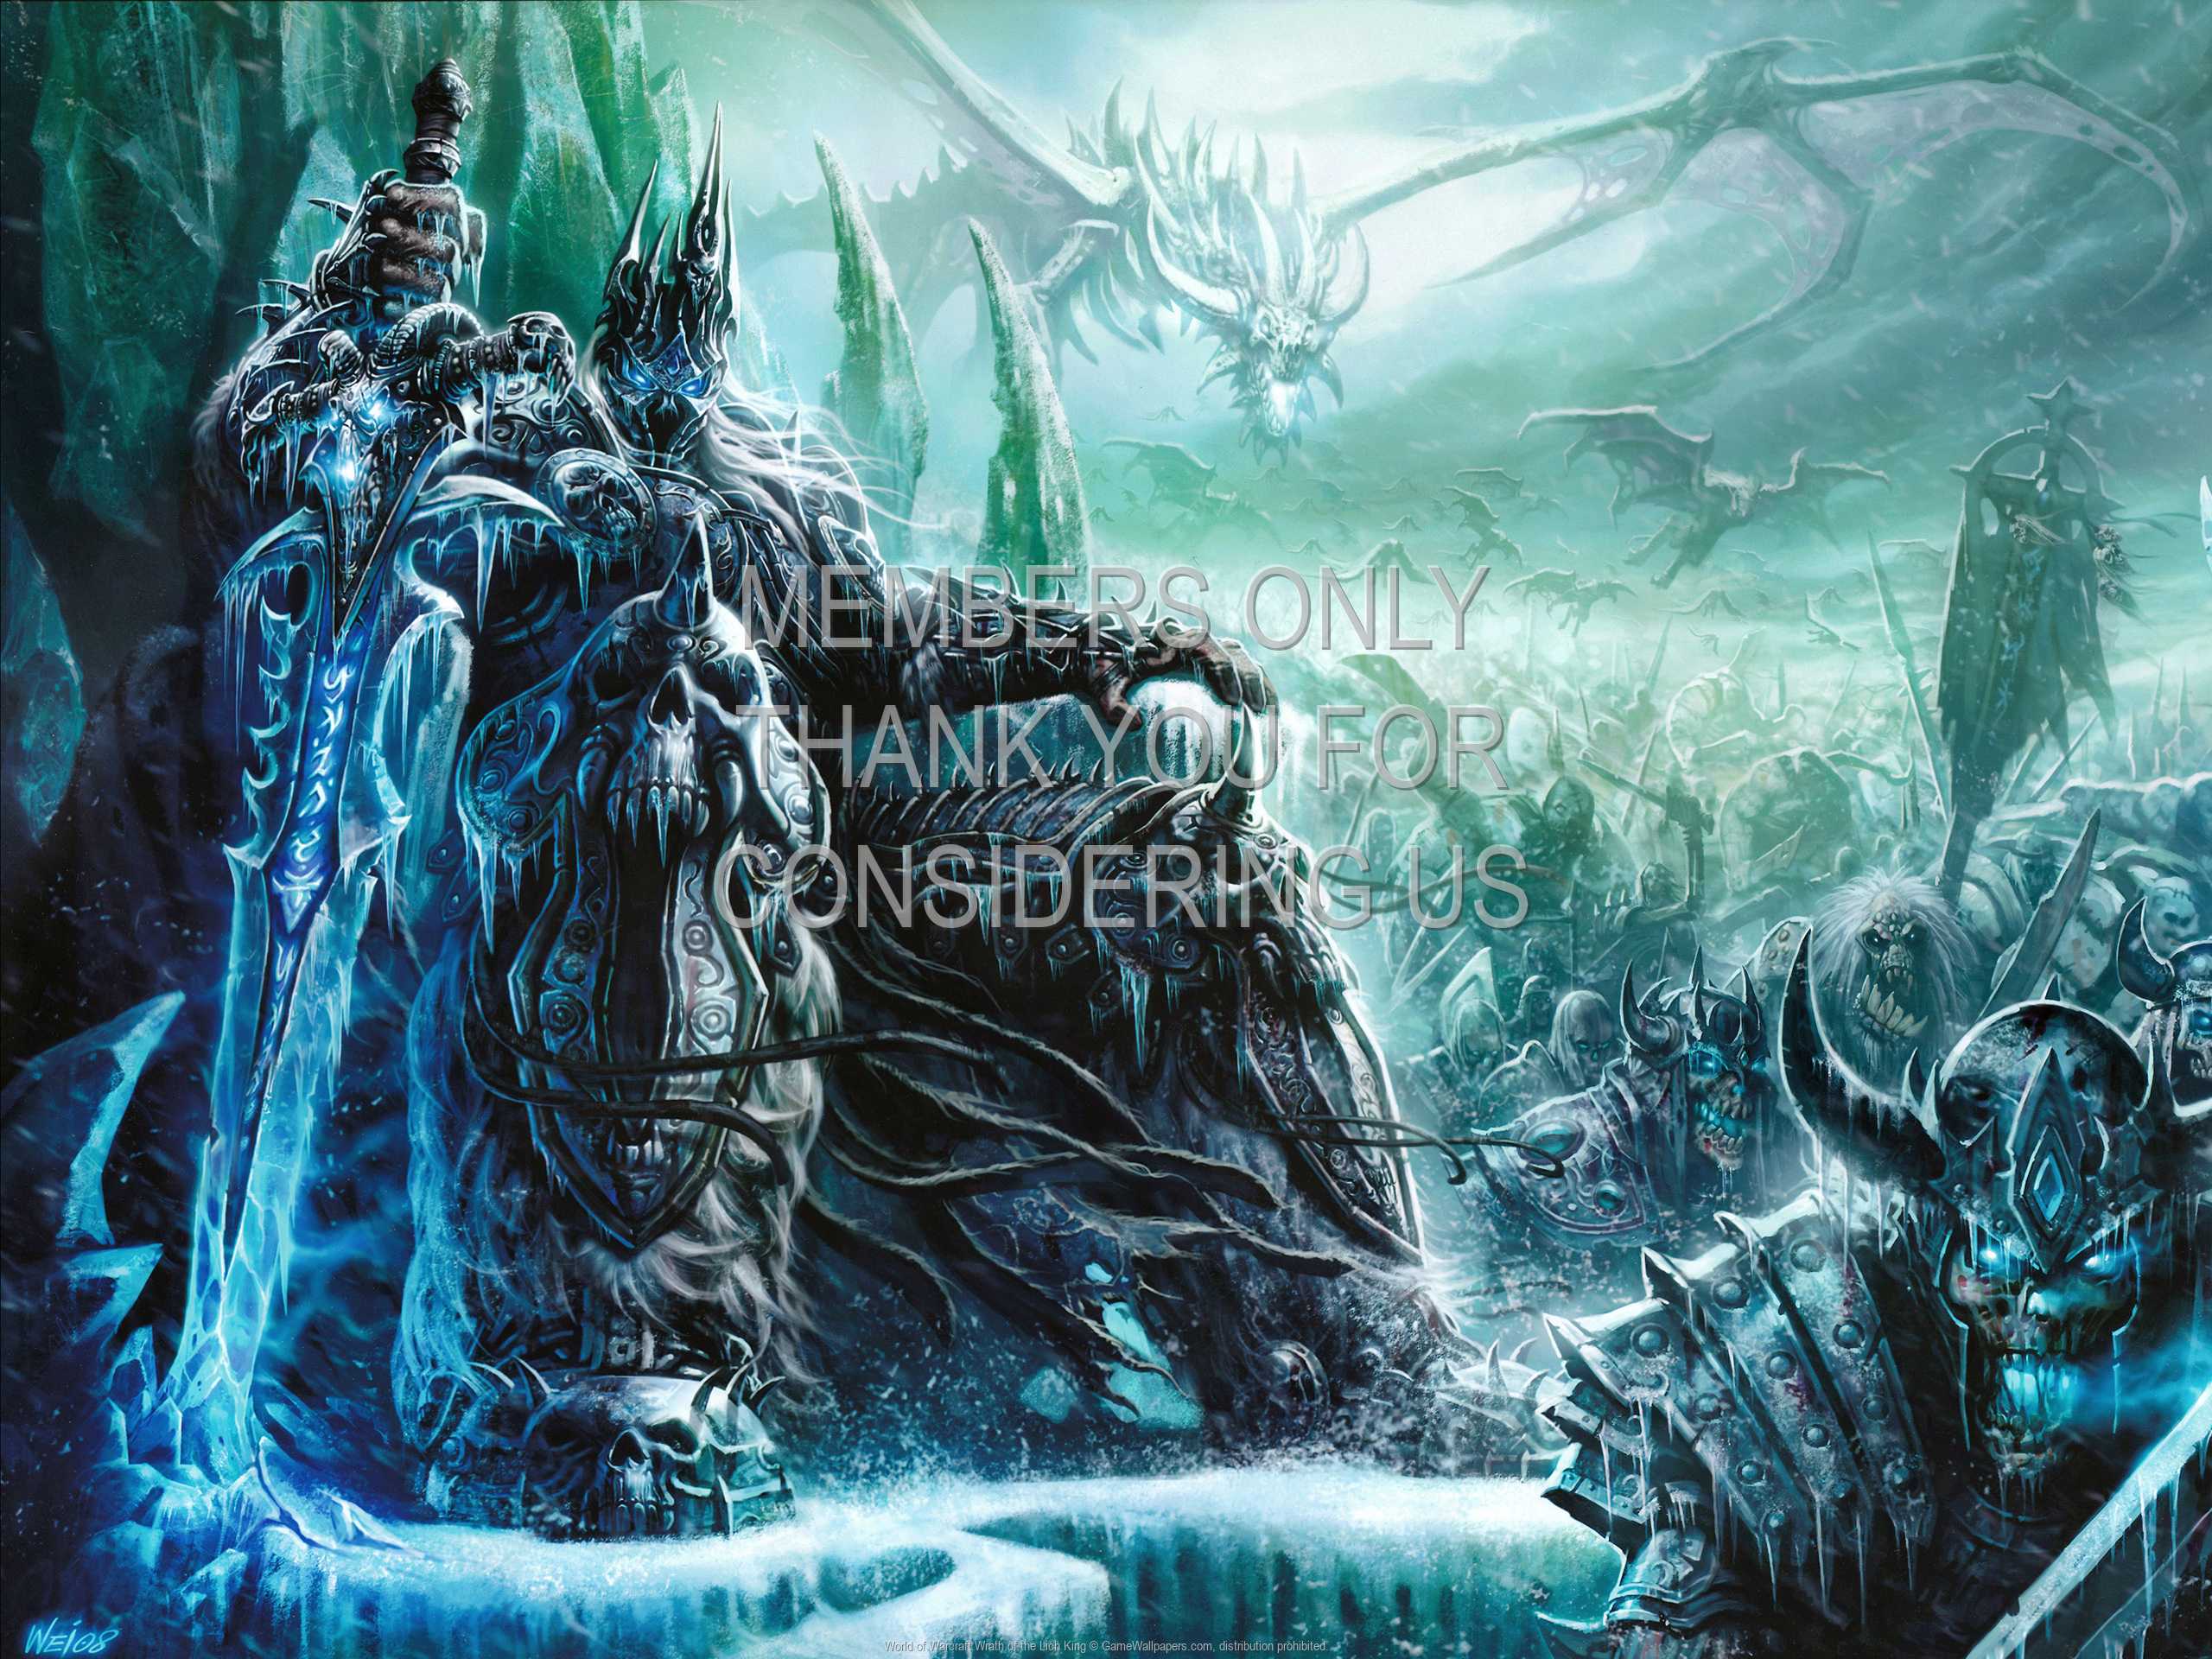 World of Warcraft: Wrath of the Lich King wallpaper 03 1080p Horizontal